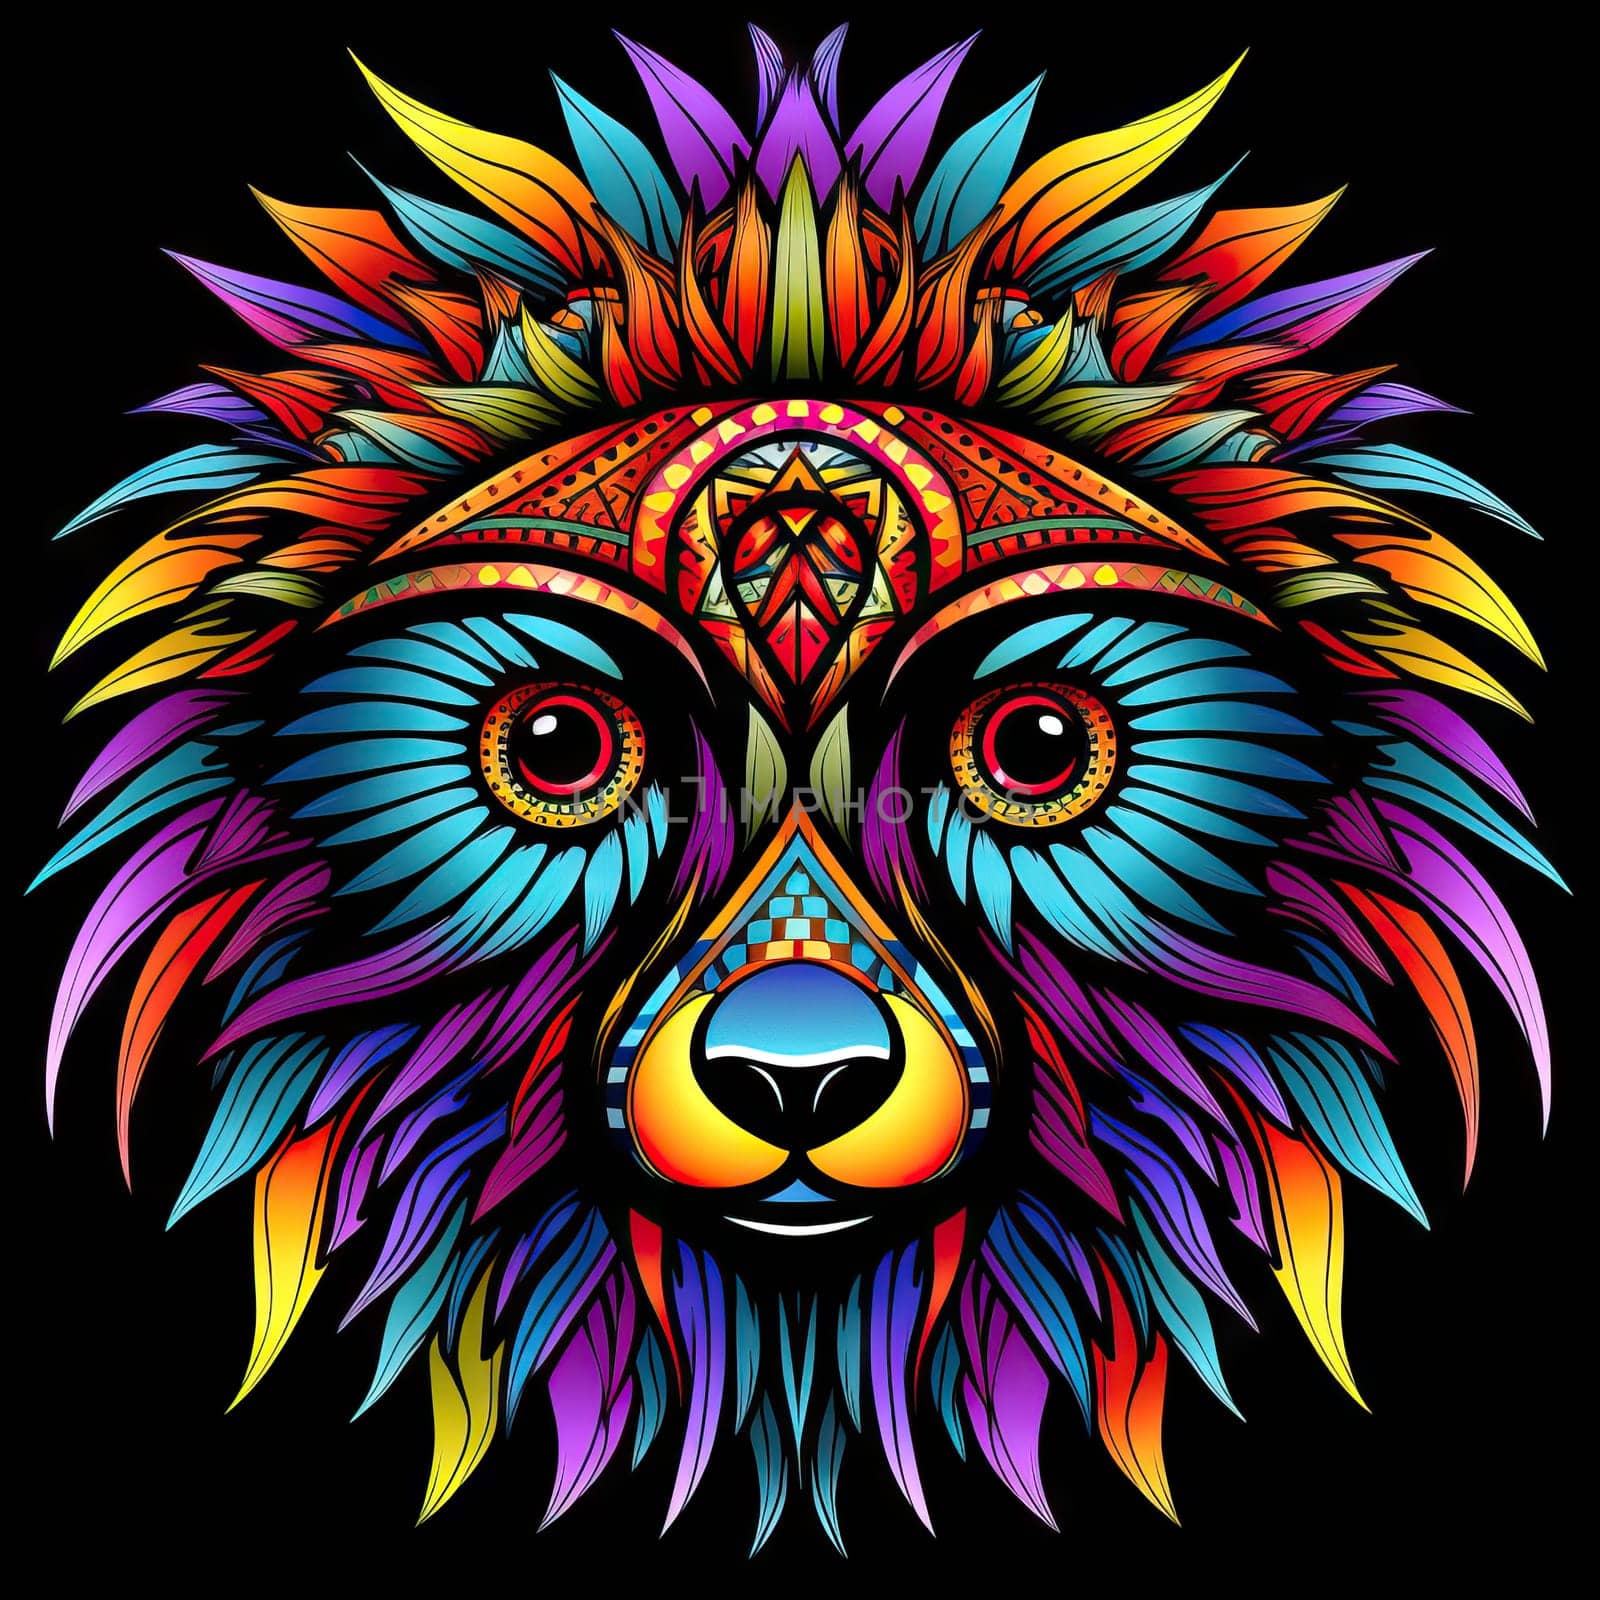 Abstract portrait of a fairy tale mystical animal in psychedelic pop art style Isolated on a black background. Template for t-shirt print, sticker, poster, etc.